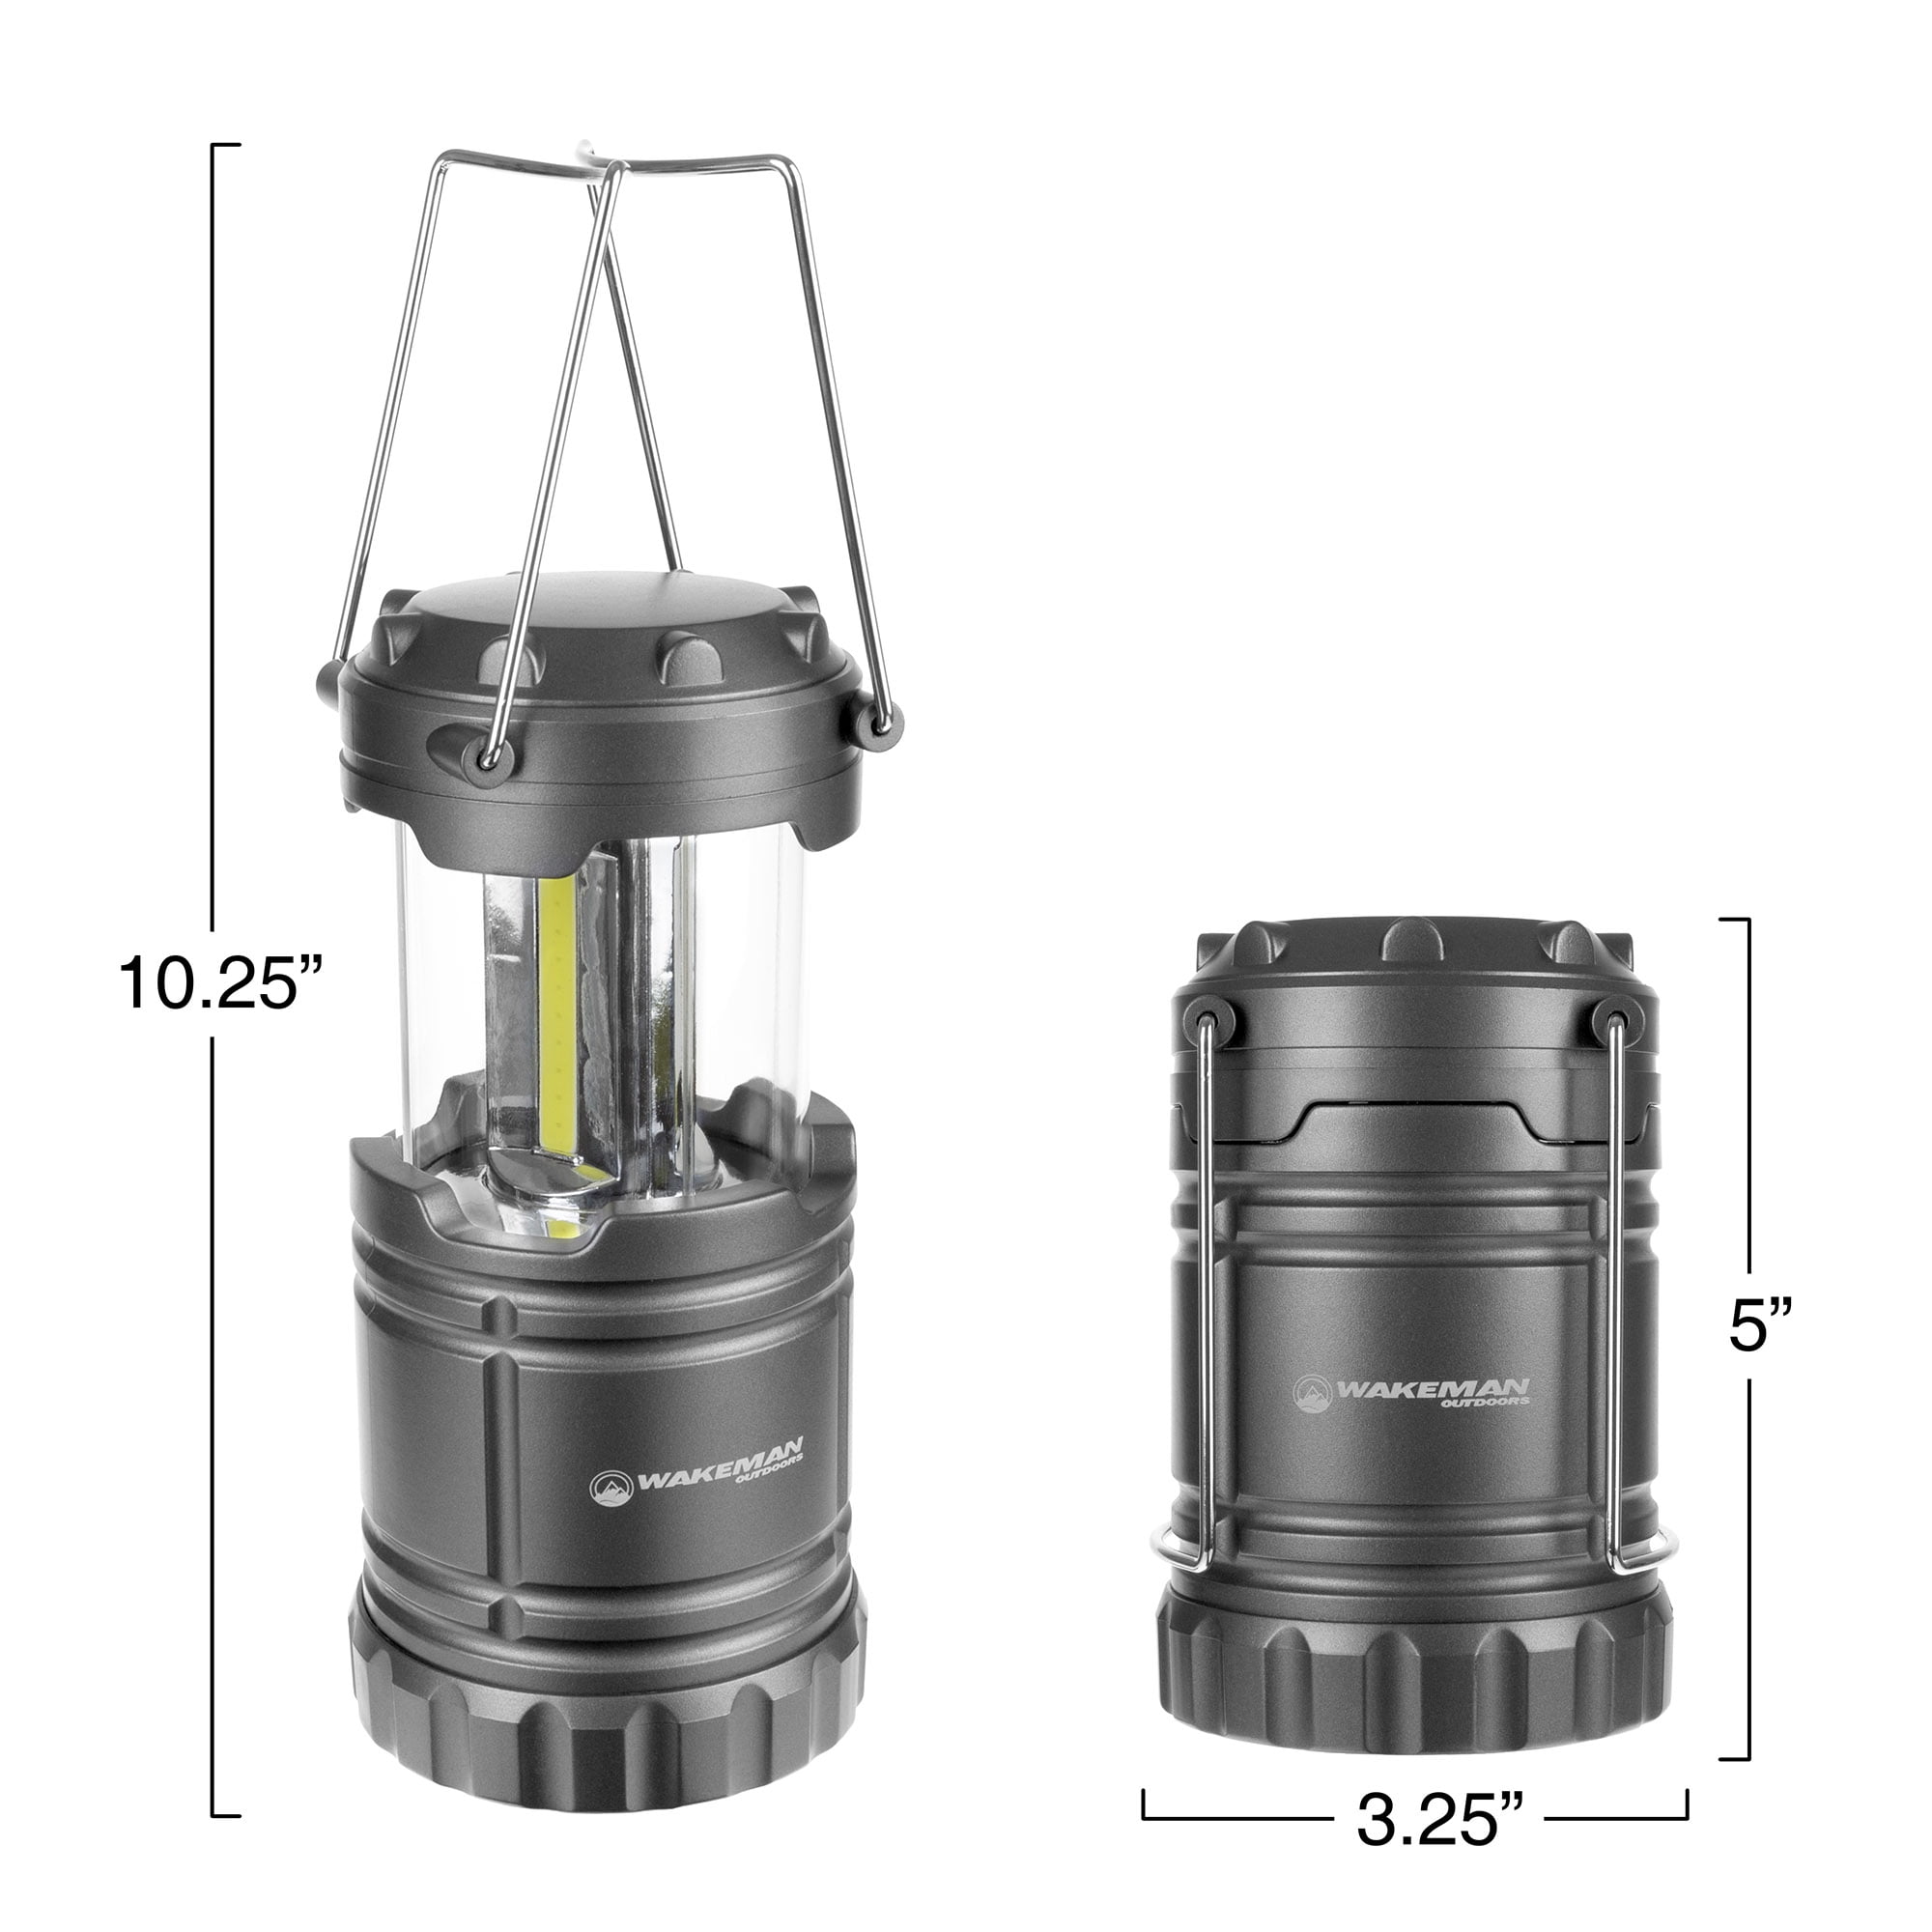 LED Lantern, Collapsible & Portable LED Outdoor Camping Lantern Flashlight  by Wakeman Outdoors - Bed Bath & Beyond - 15873088